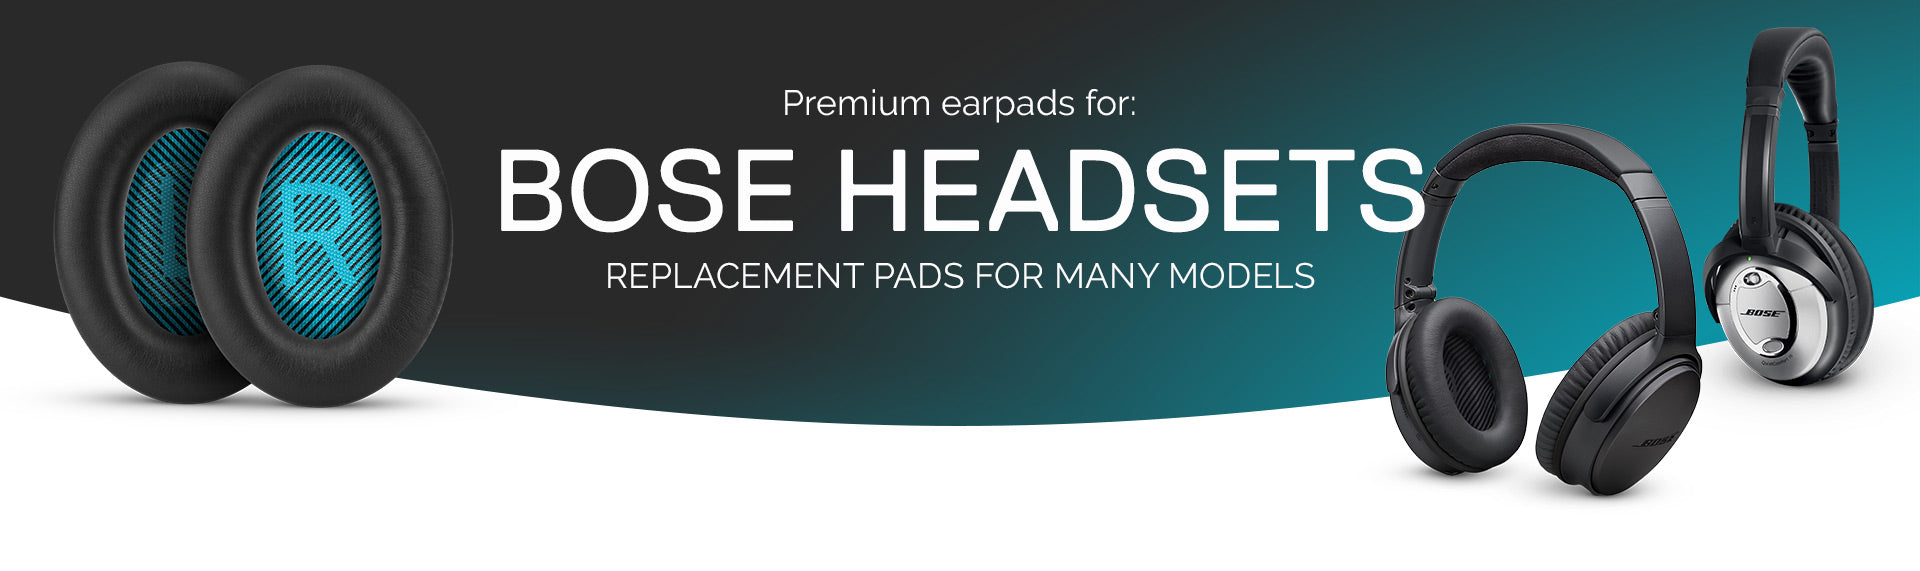 Replacement Earpads for Bose Headphones